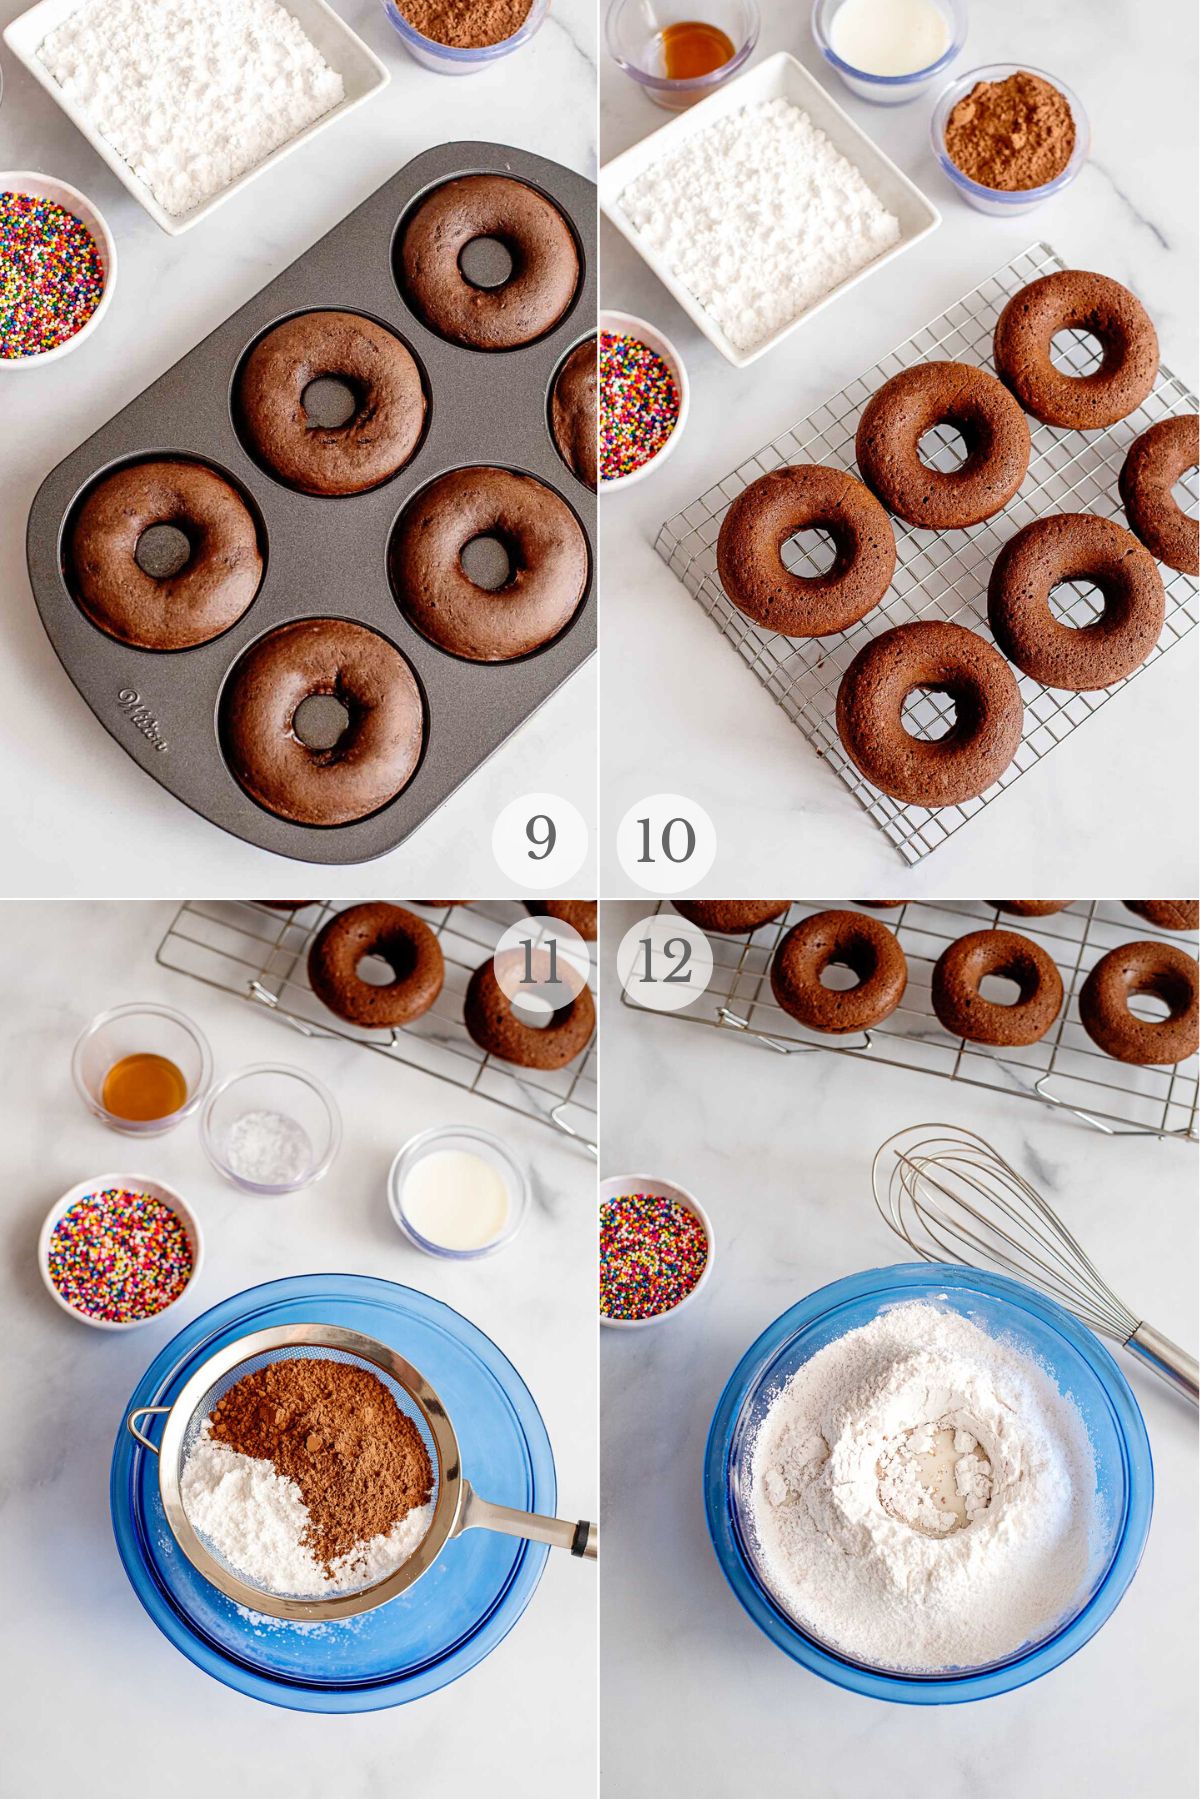 chocolate frosted donuts recipe steps 9-12.